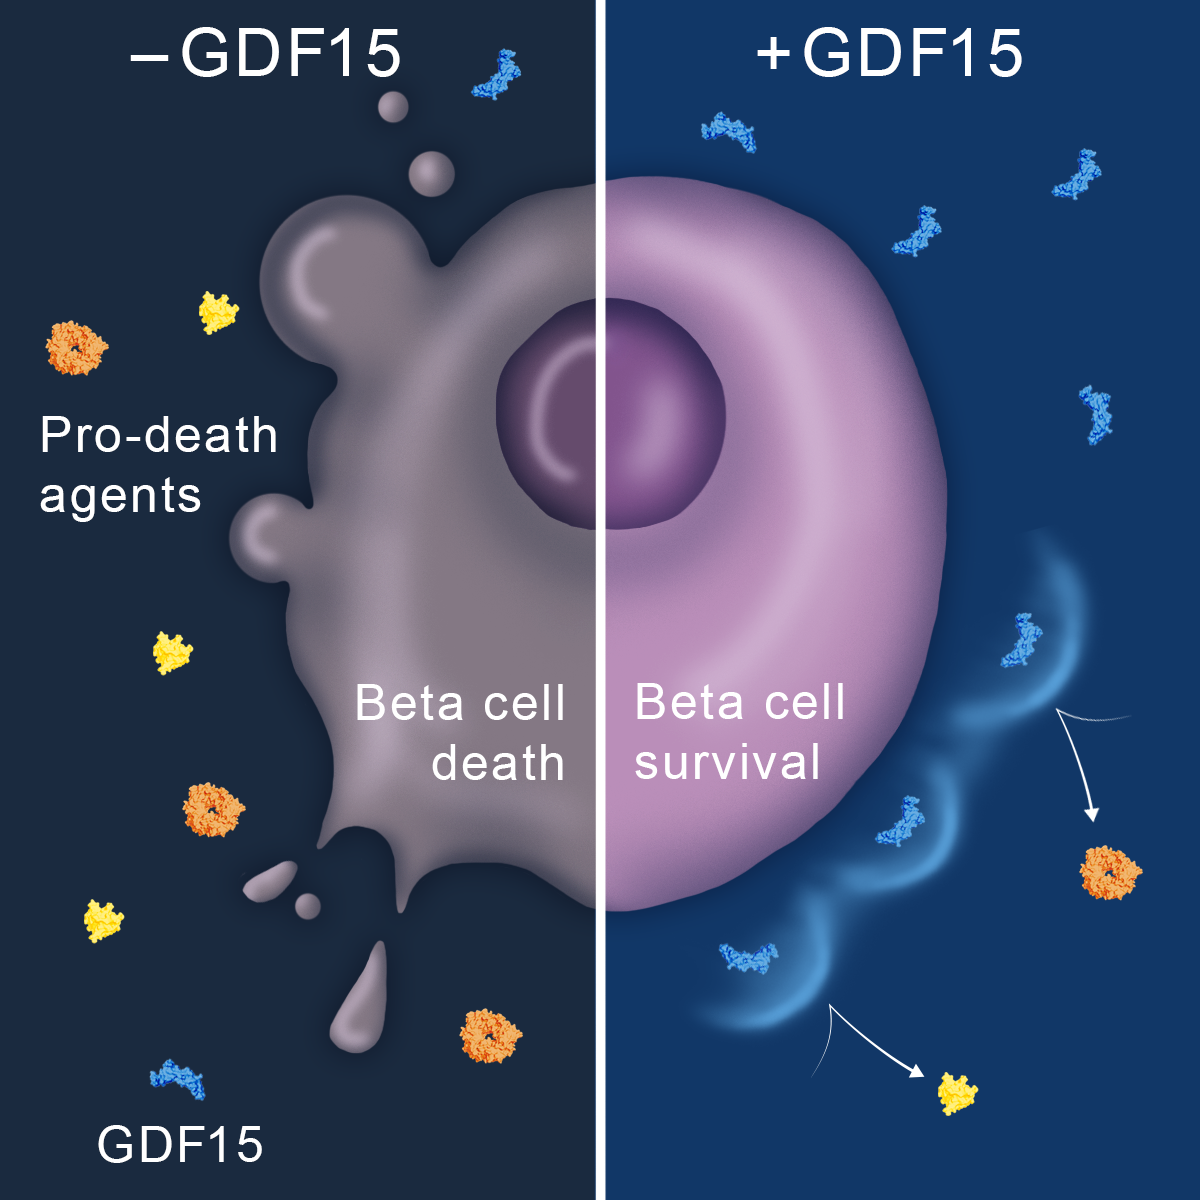 Illustration of GDF15 protein in action